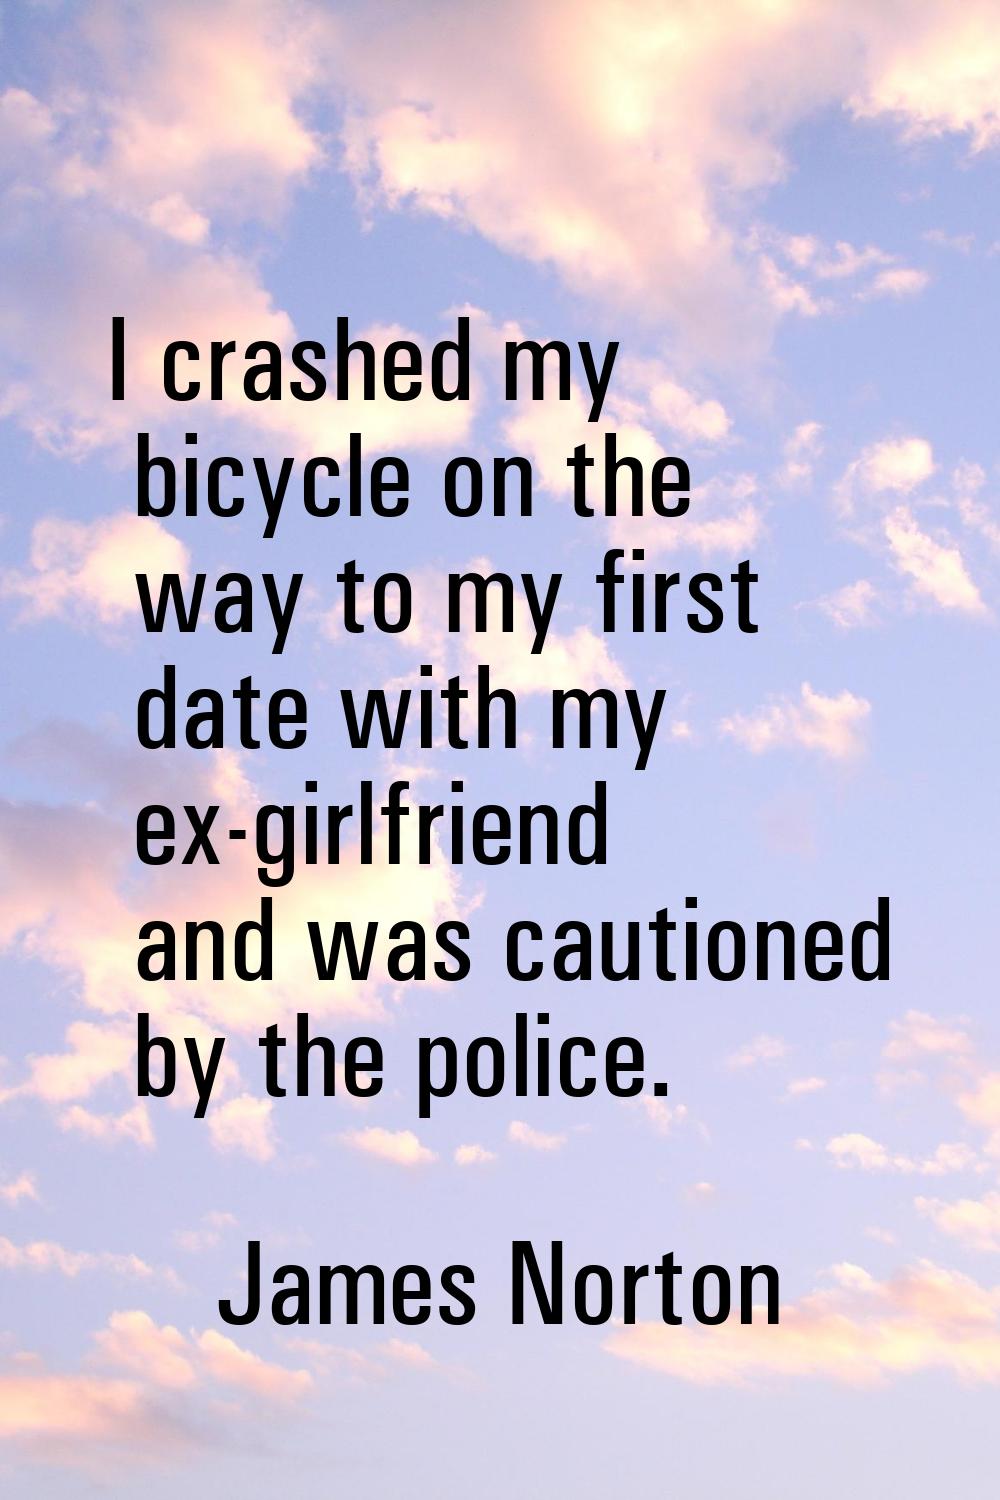 I crashed my bicycle on the way to my first date with my ex-girlfriend and was cautioned by the pol